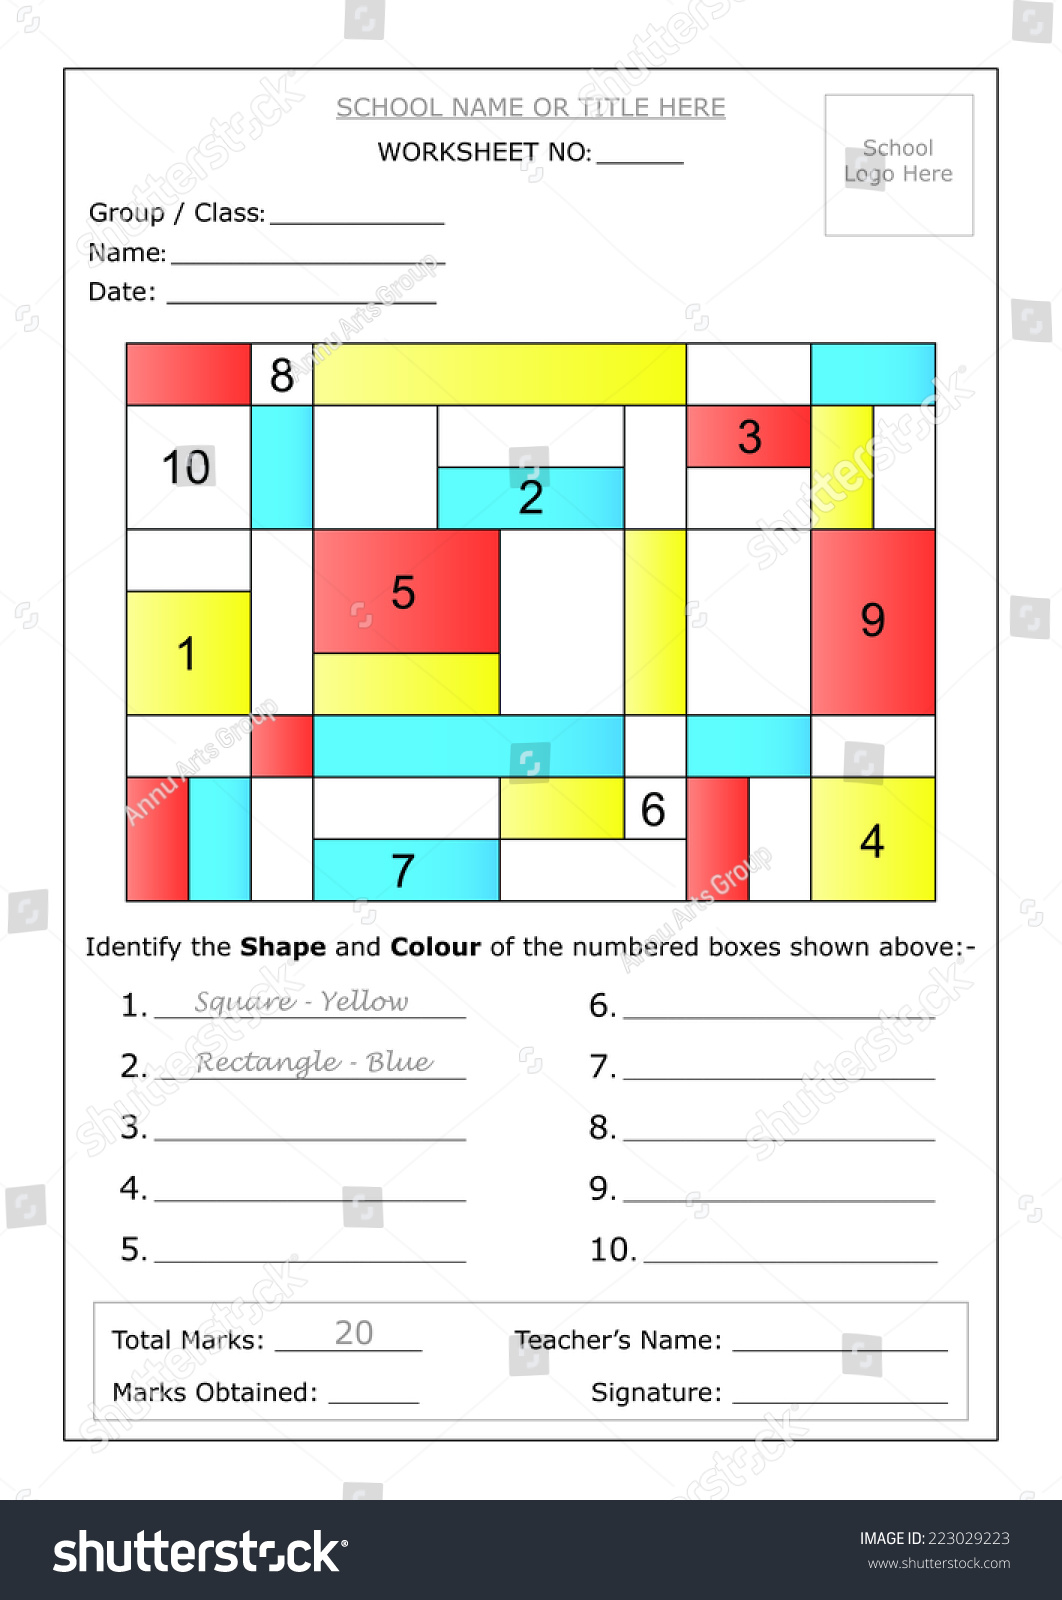 editable-montessori-worksheet-to-identify-the-shape-and-colour-of-the-numbered-boxes-ready-to